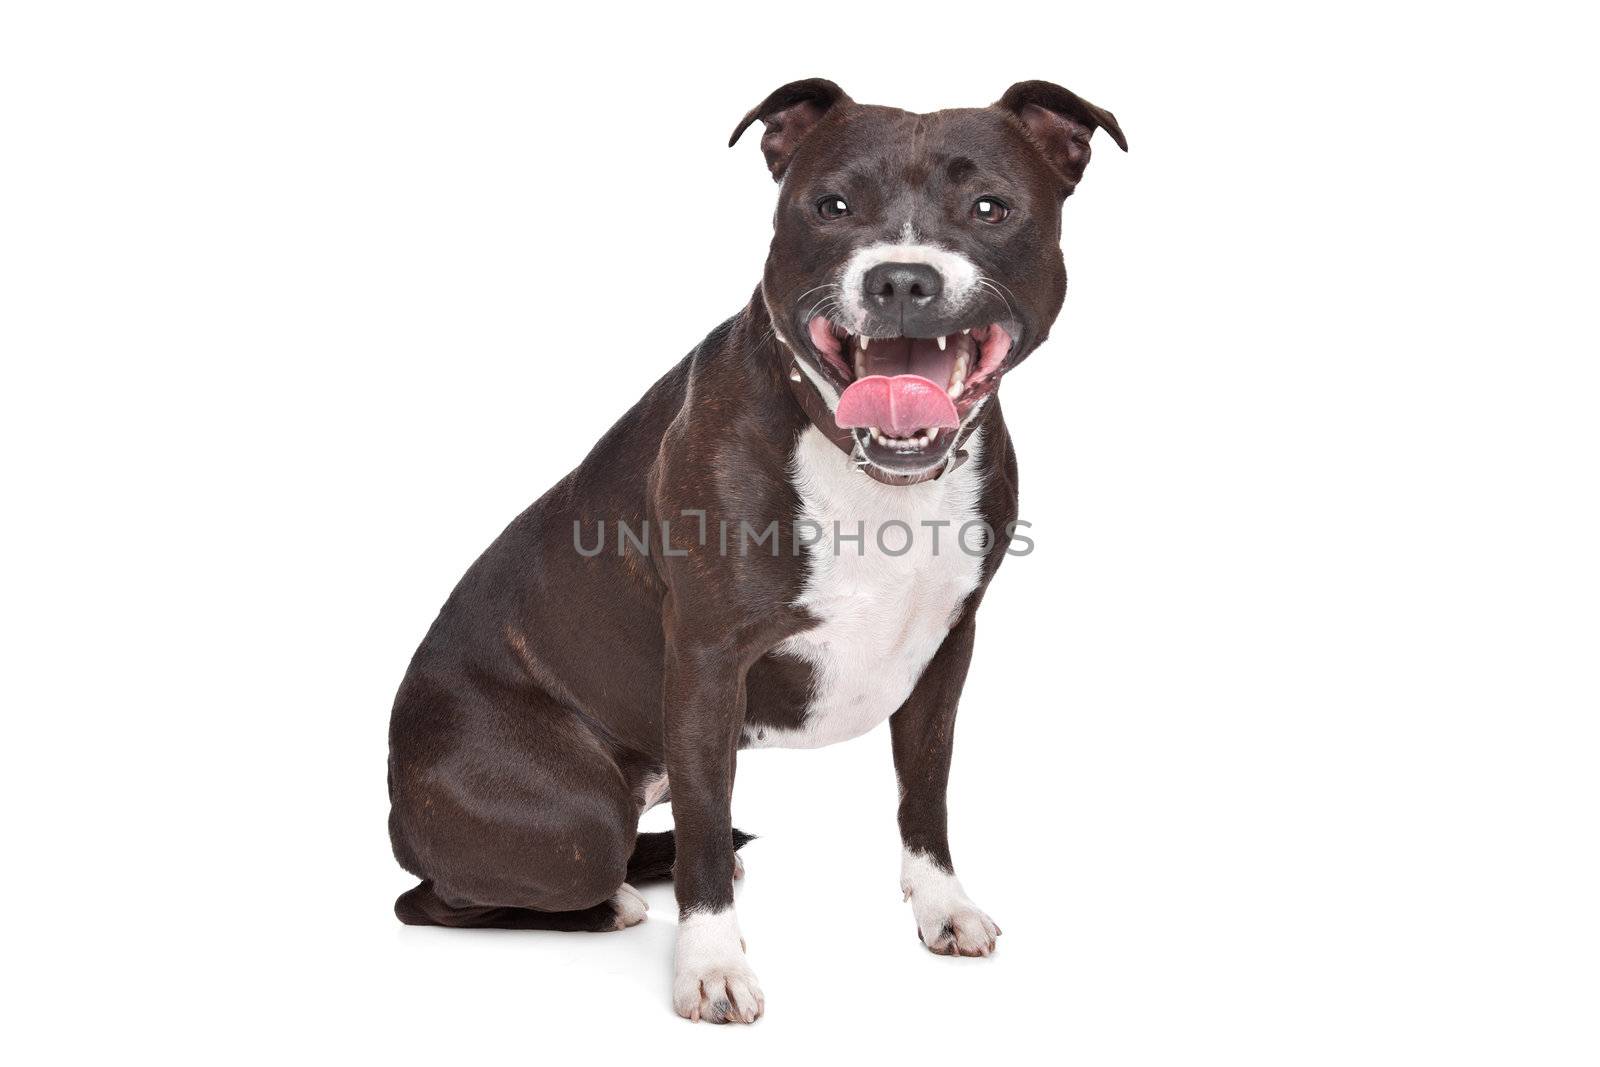 Staffordshire bull terrier in front of a white background